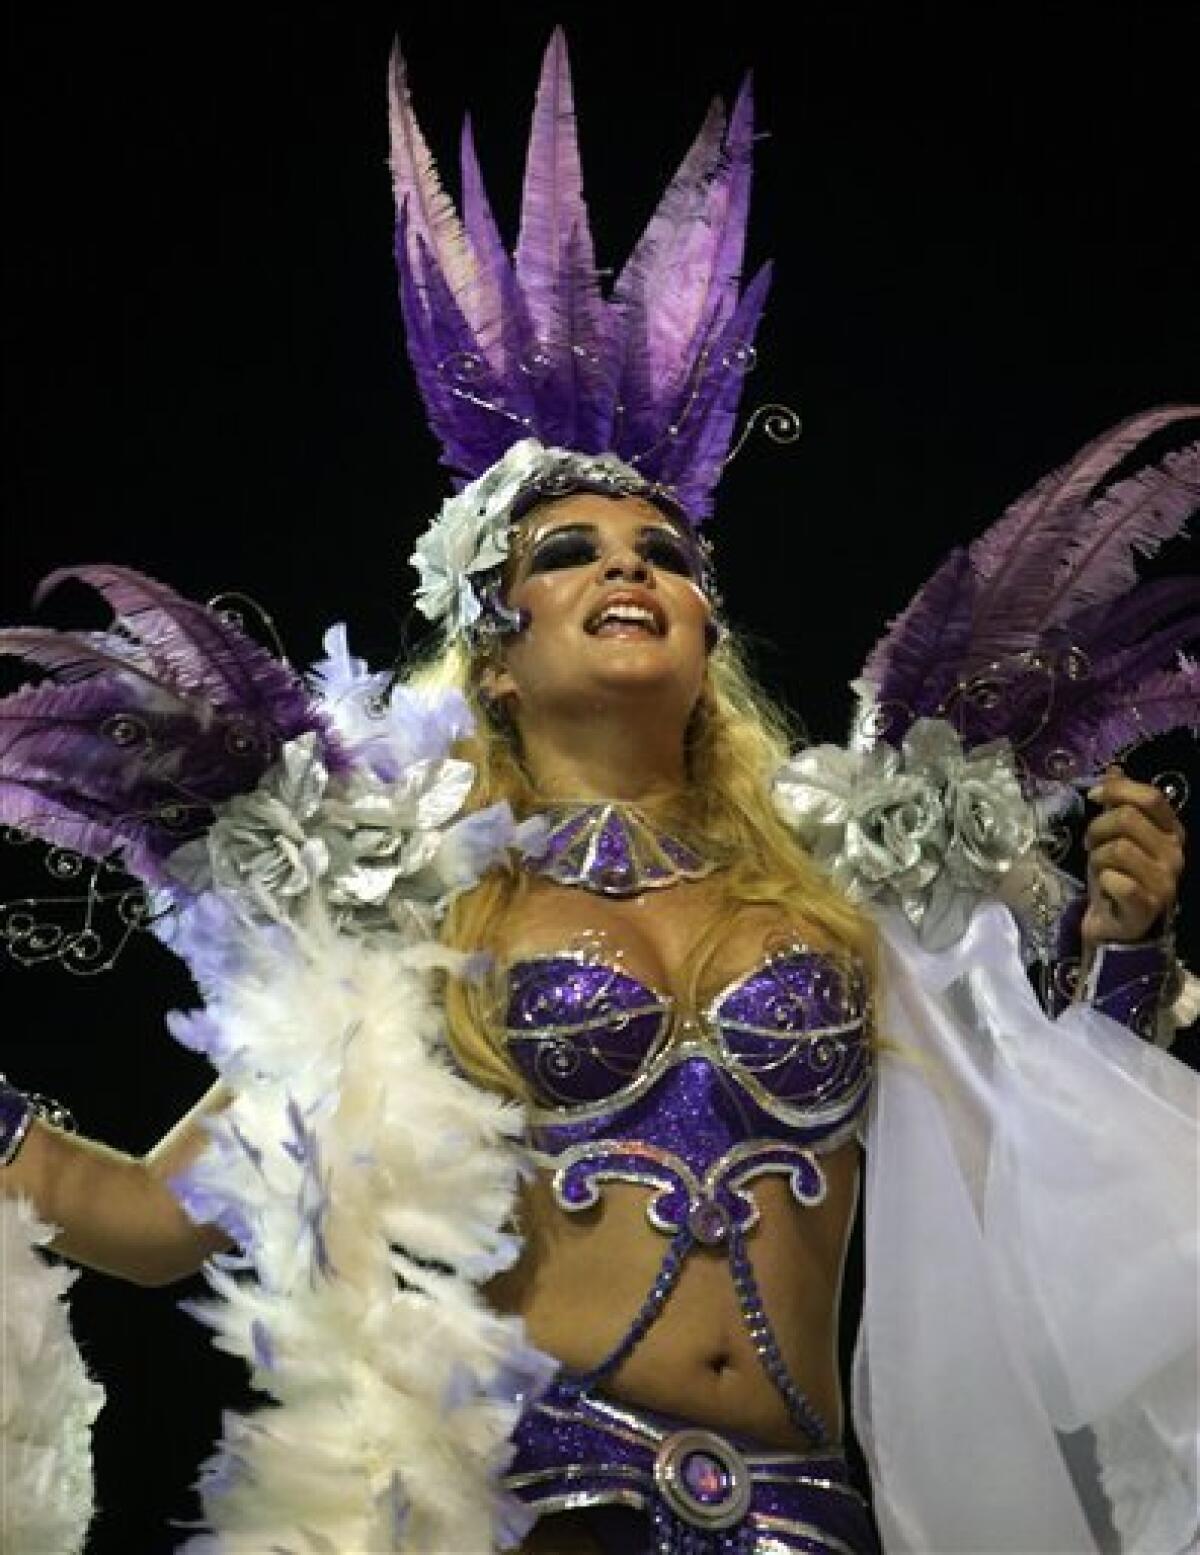 Rio Carnival kicks off with sizzling samba dancers and dazzling outfits  (but the new bishop mayor gives the risque event a miss)